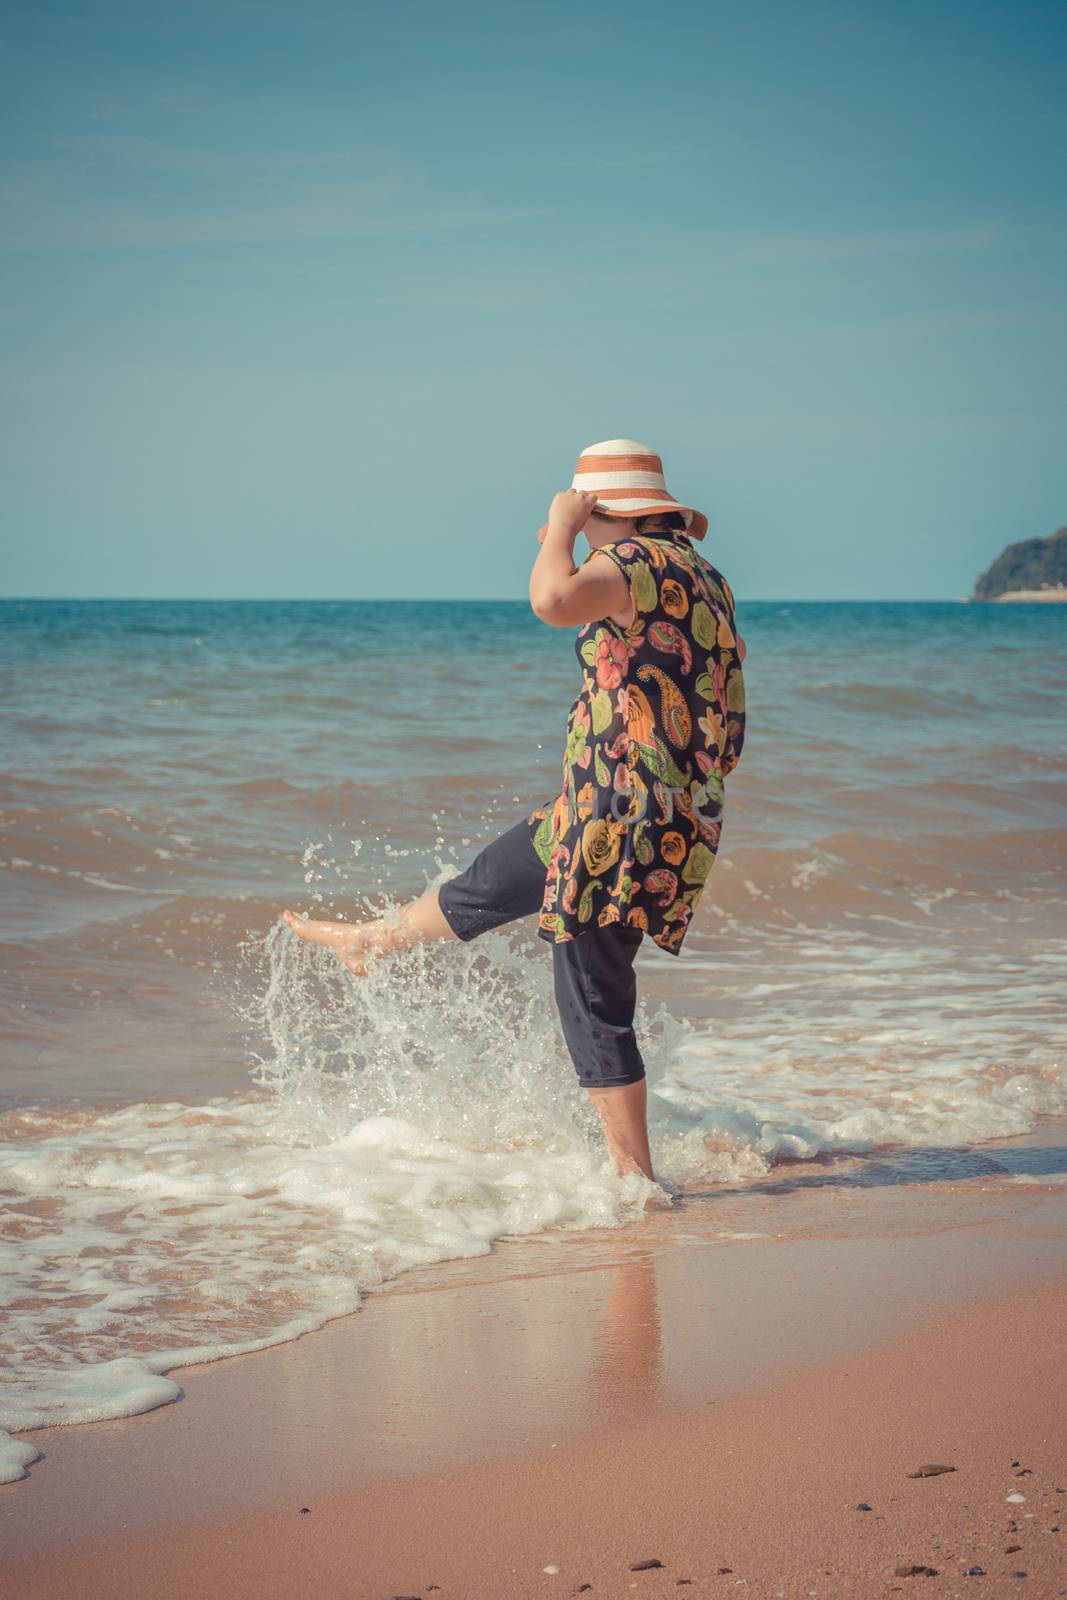 Asia woman plump body in colorful dress with hat posing at beach with blue sea and sky when travel , process in vintage style